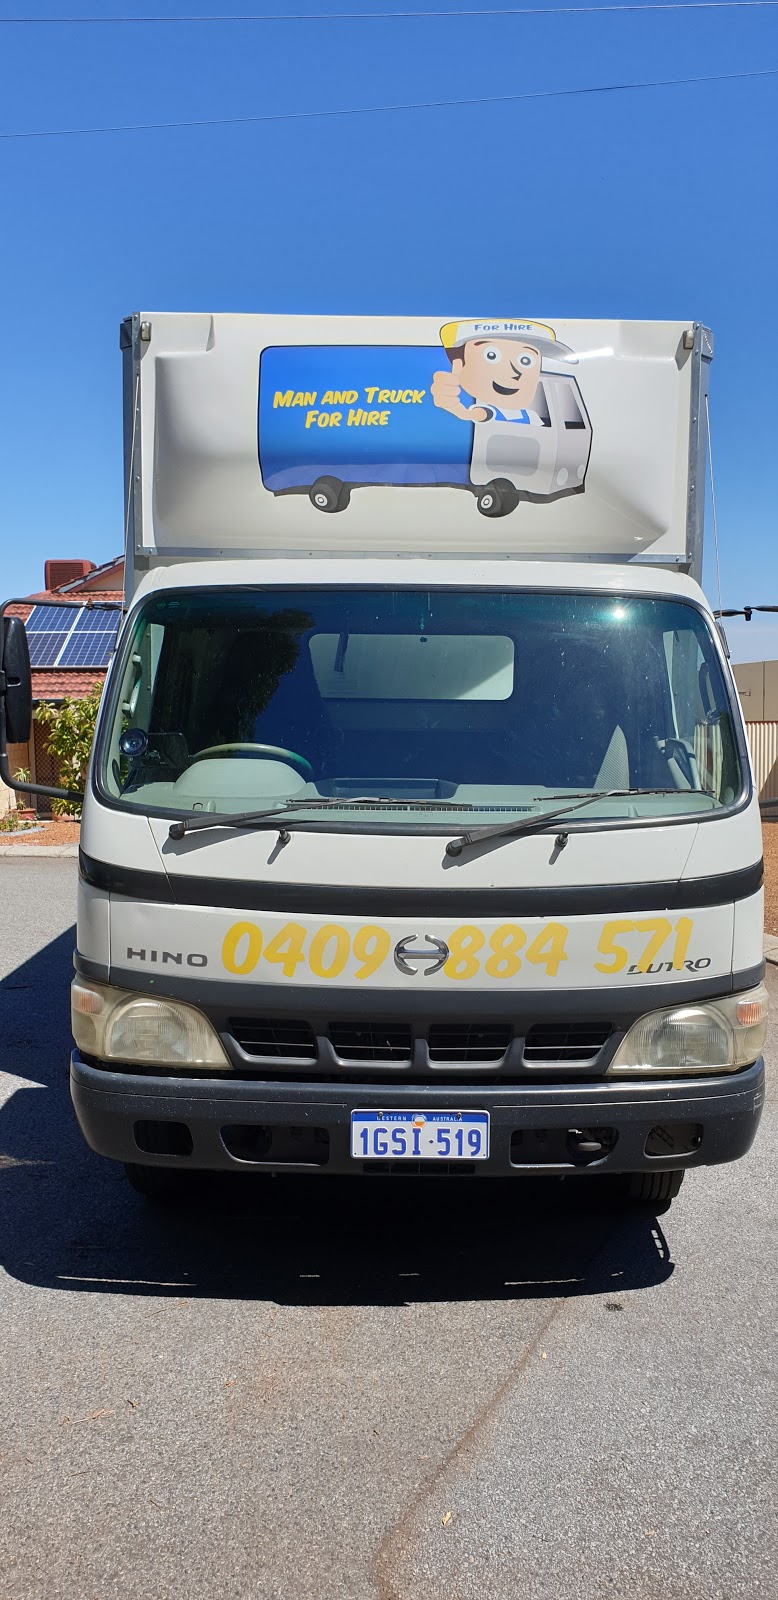 Man and Truck for hire | moving company | 190 Sultana Rd E, Forrestfield WA 6058, Australia | 0409884571 OR +61 409 884 571